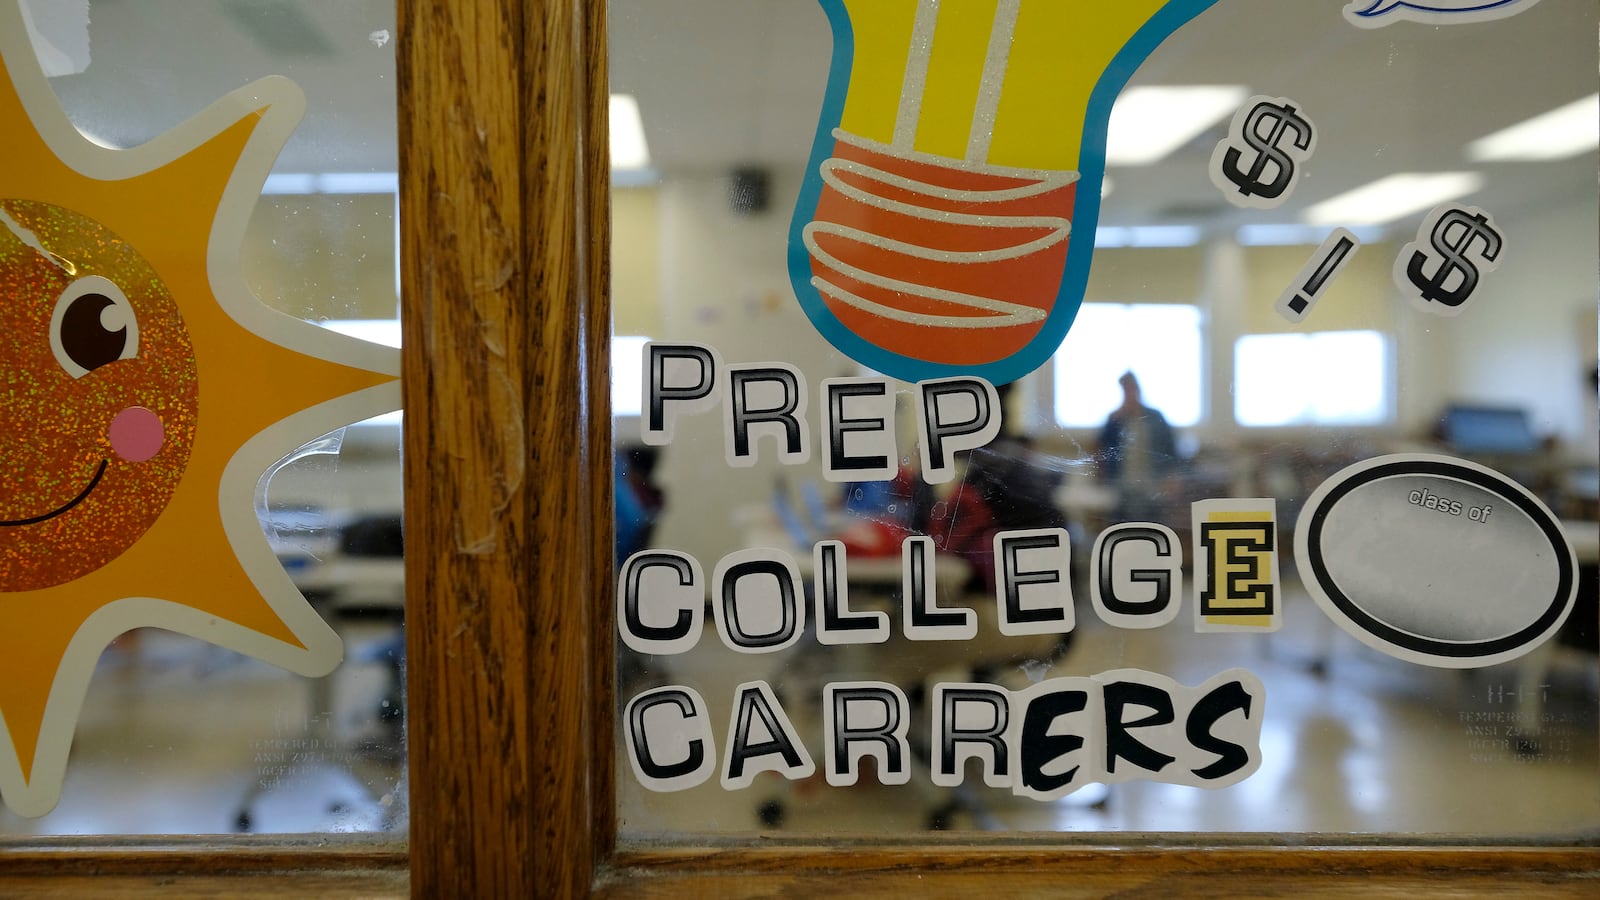 A “Prep College Careers” sign on a window at Crispus Attucks High School, a public school in Indianapolis, Indiana. — April 2019 — Photo by Alan Petersime/Chalkbeat